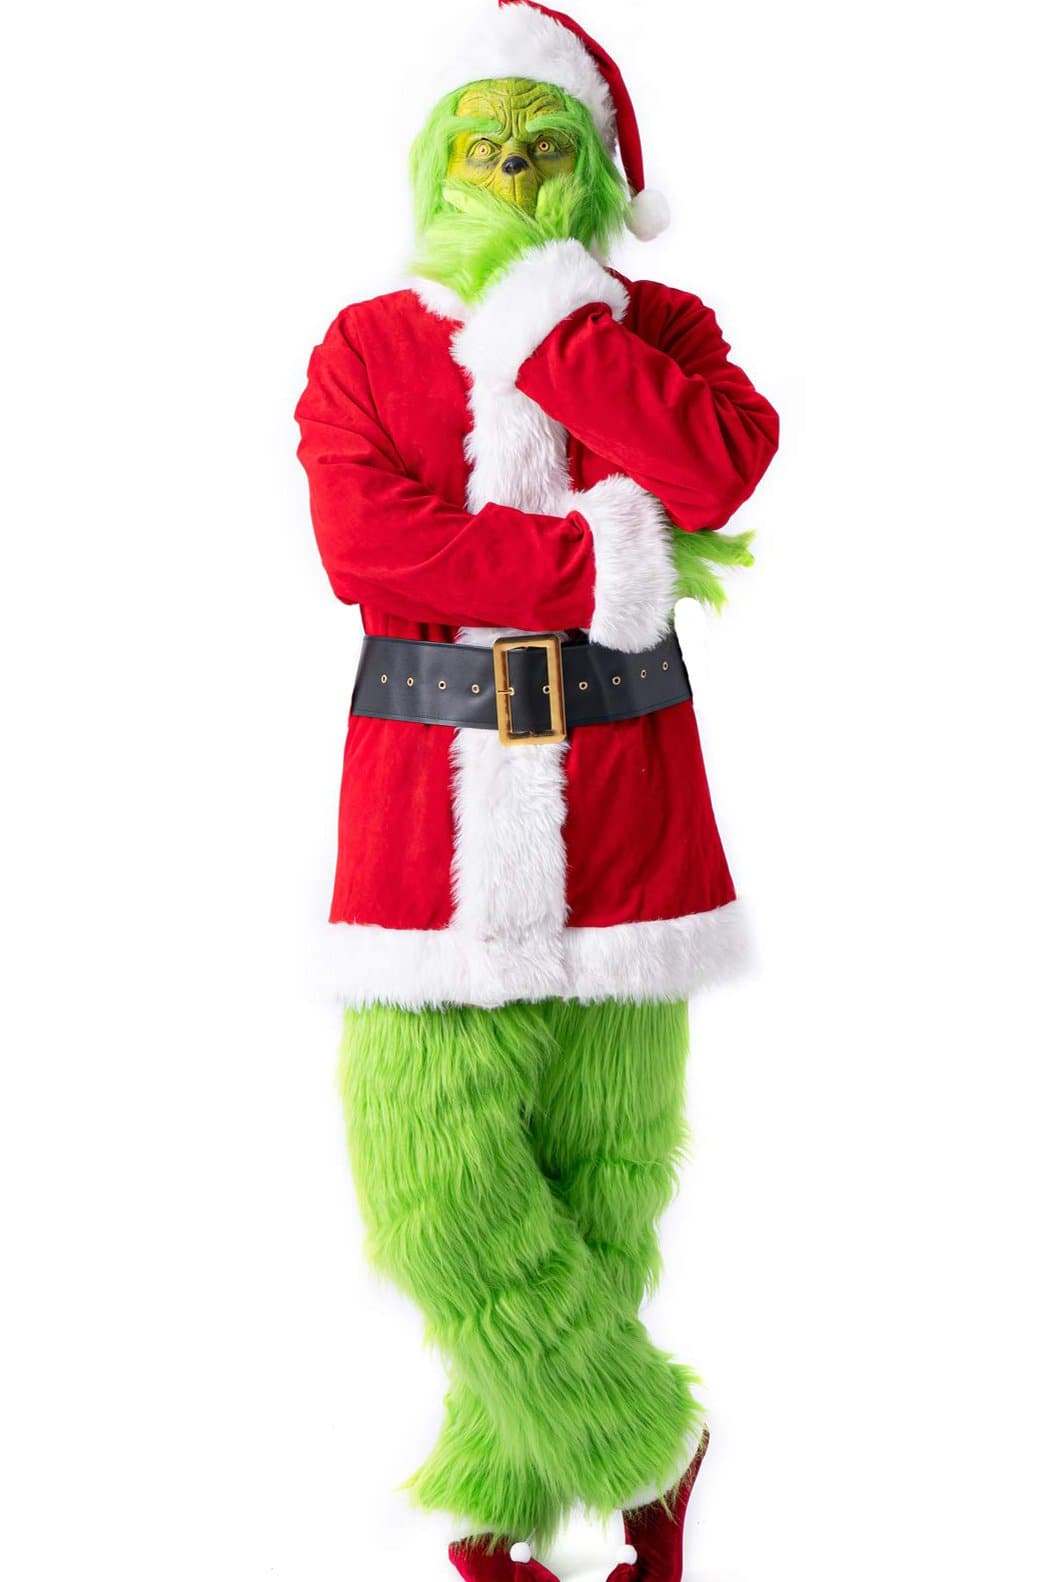 Adult The Grinch Stole Christmas Costume, Grinch in Santa Suit